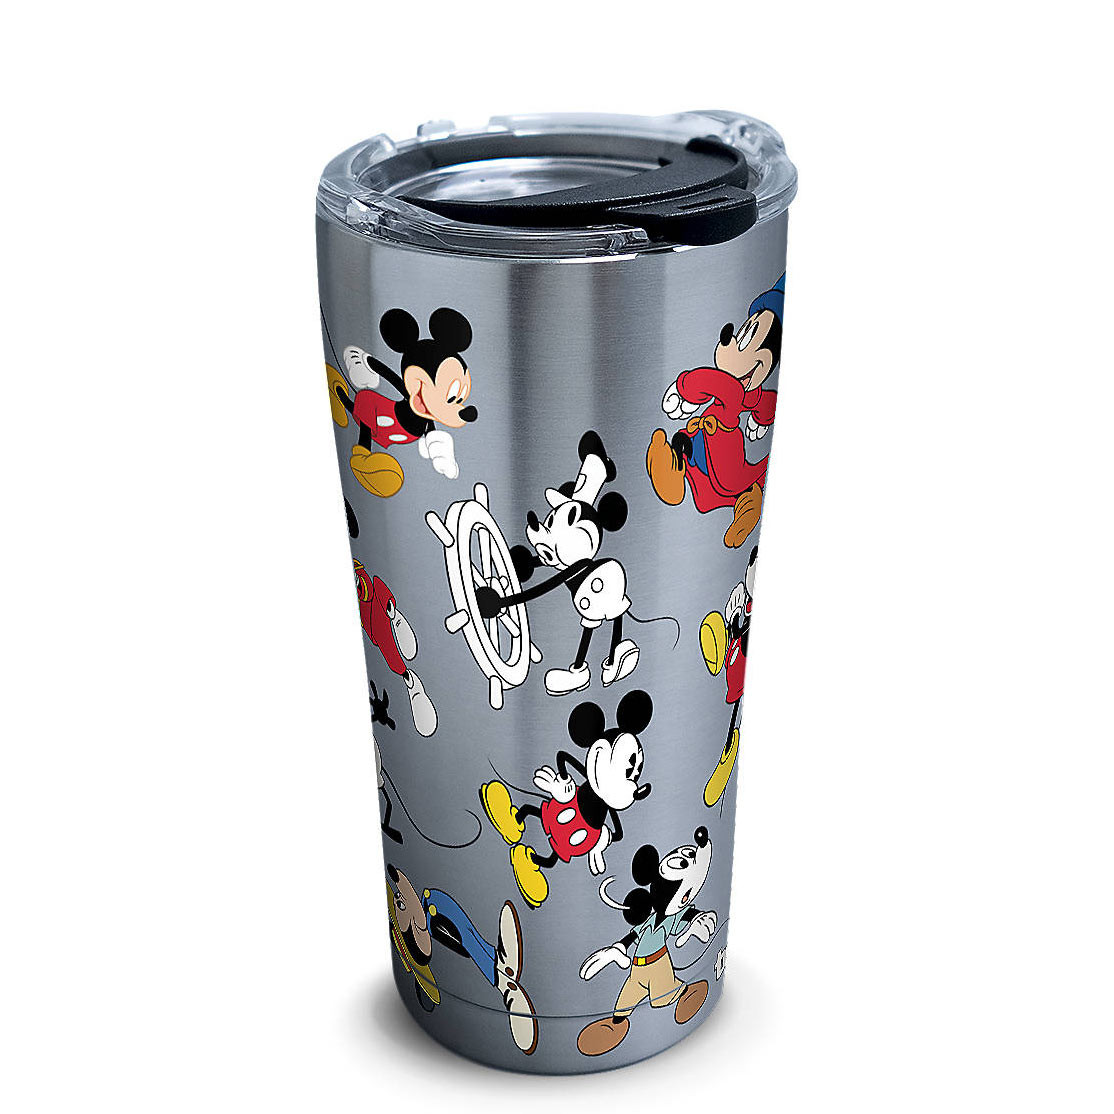 Mickey Mouse 90th Birthday 20 Oz Stainless Steel Mug